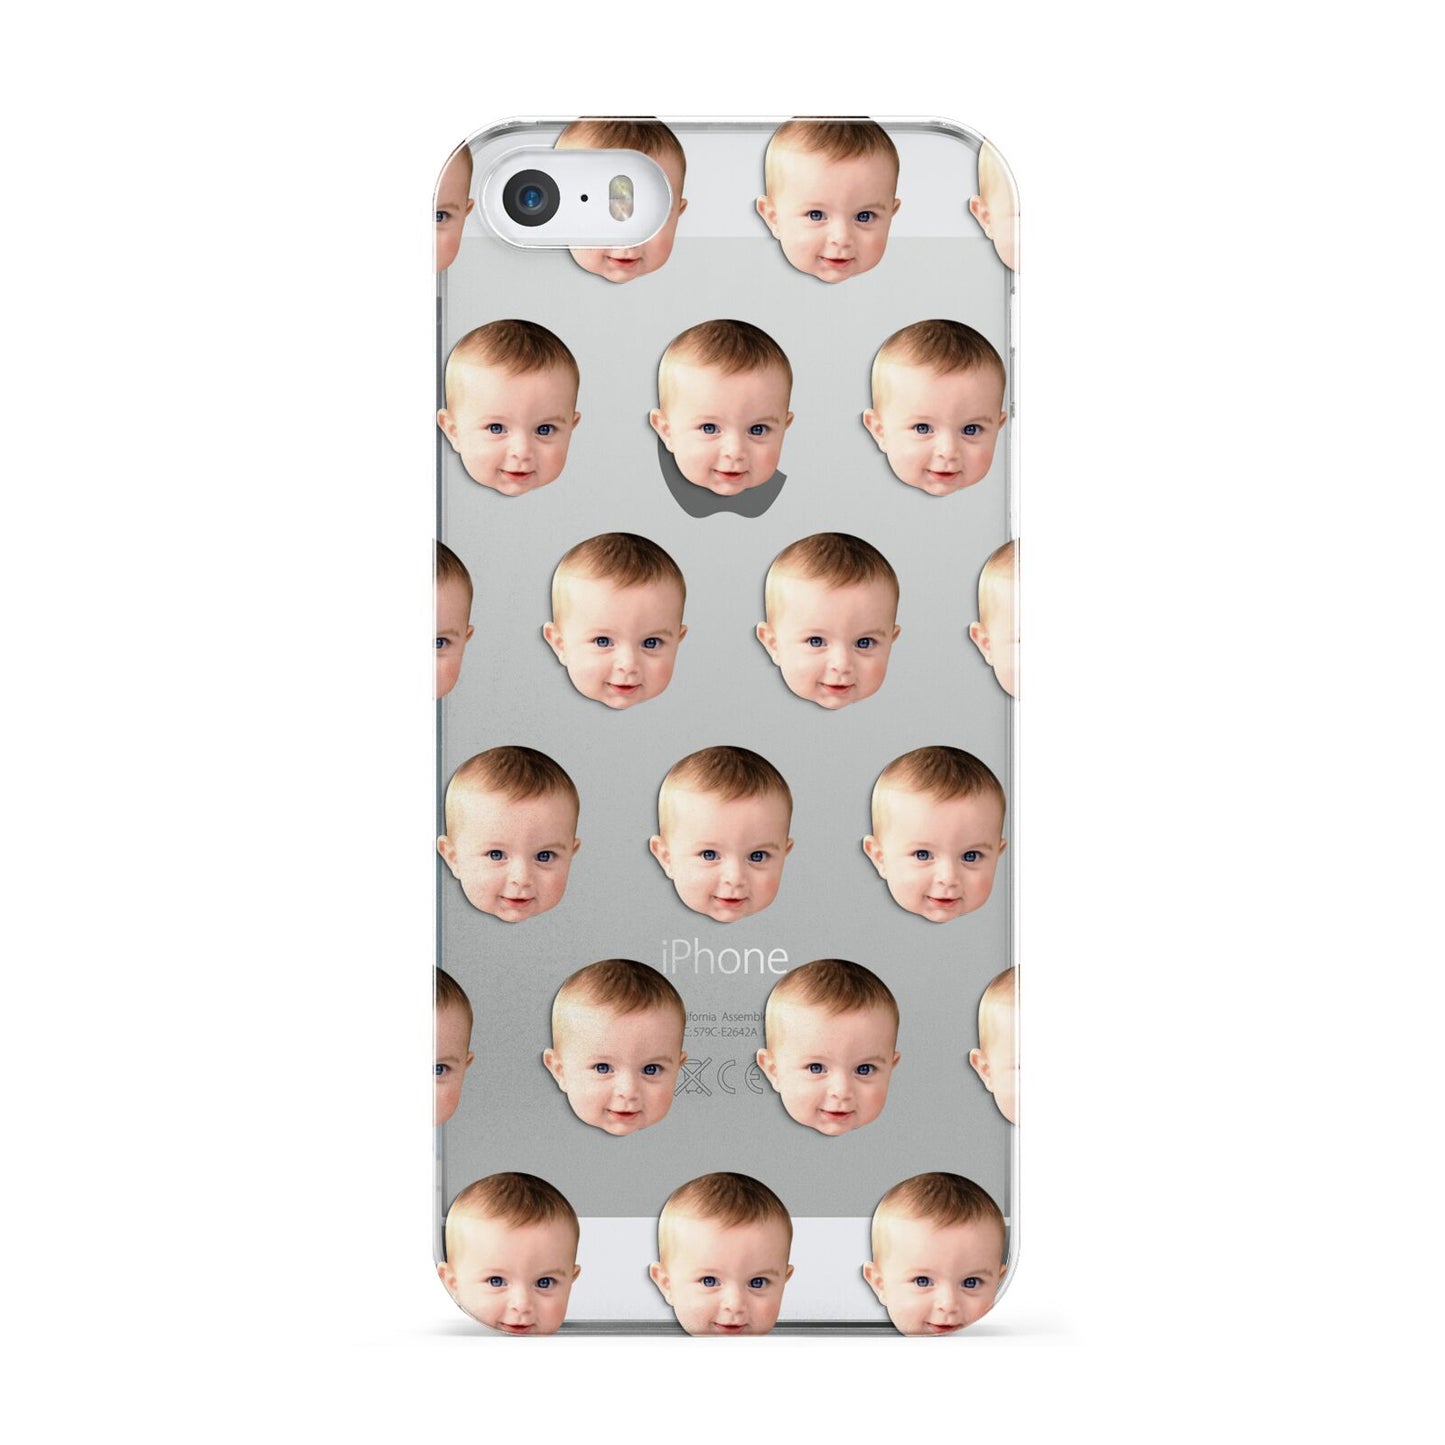 Baby Face Apple iPhone 5 Case